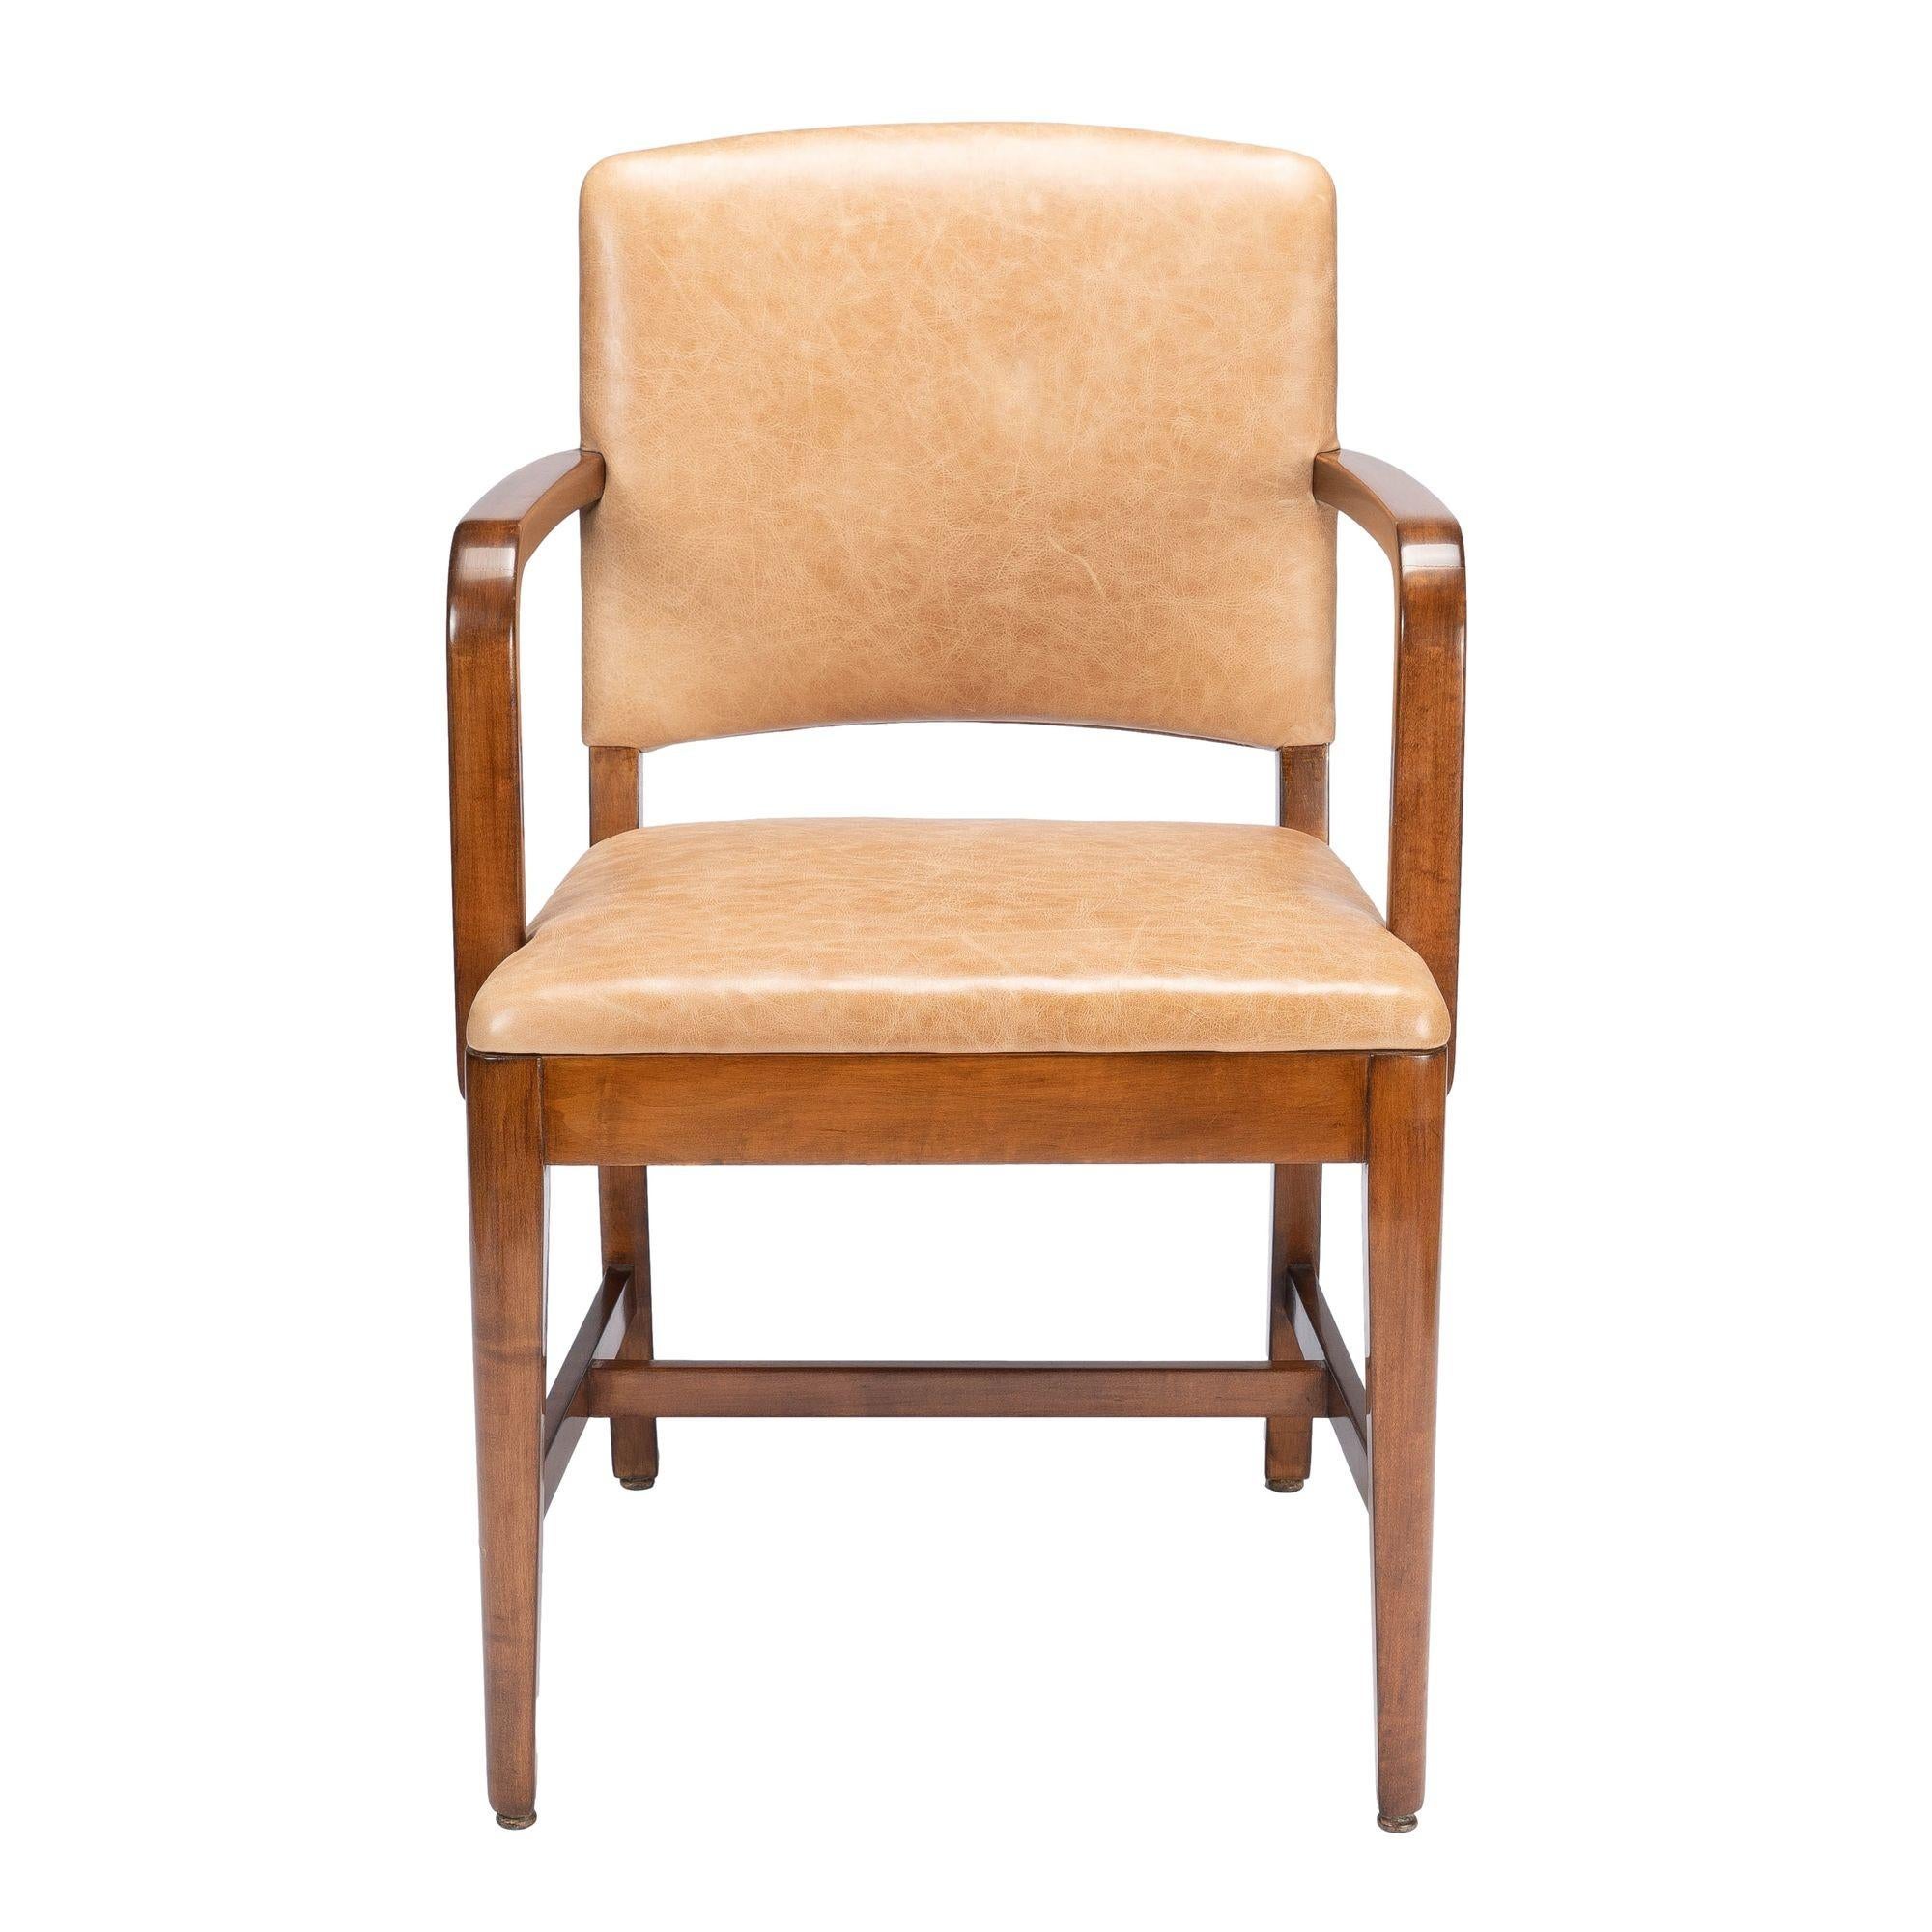 American Modernist maple armchair. The chair seat and back have been re-upholstered in natural buff colored Italian oil tanned leather. The upholstered back panel has a slight concave construction with a faintly bowed crest rail. The upholstered